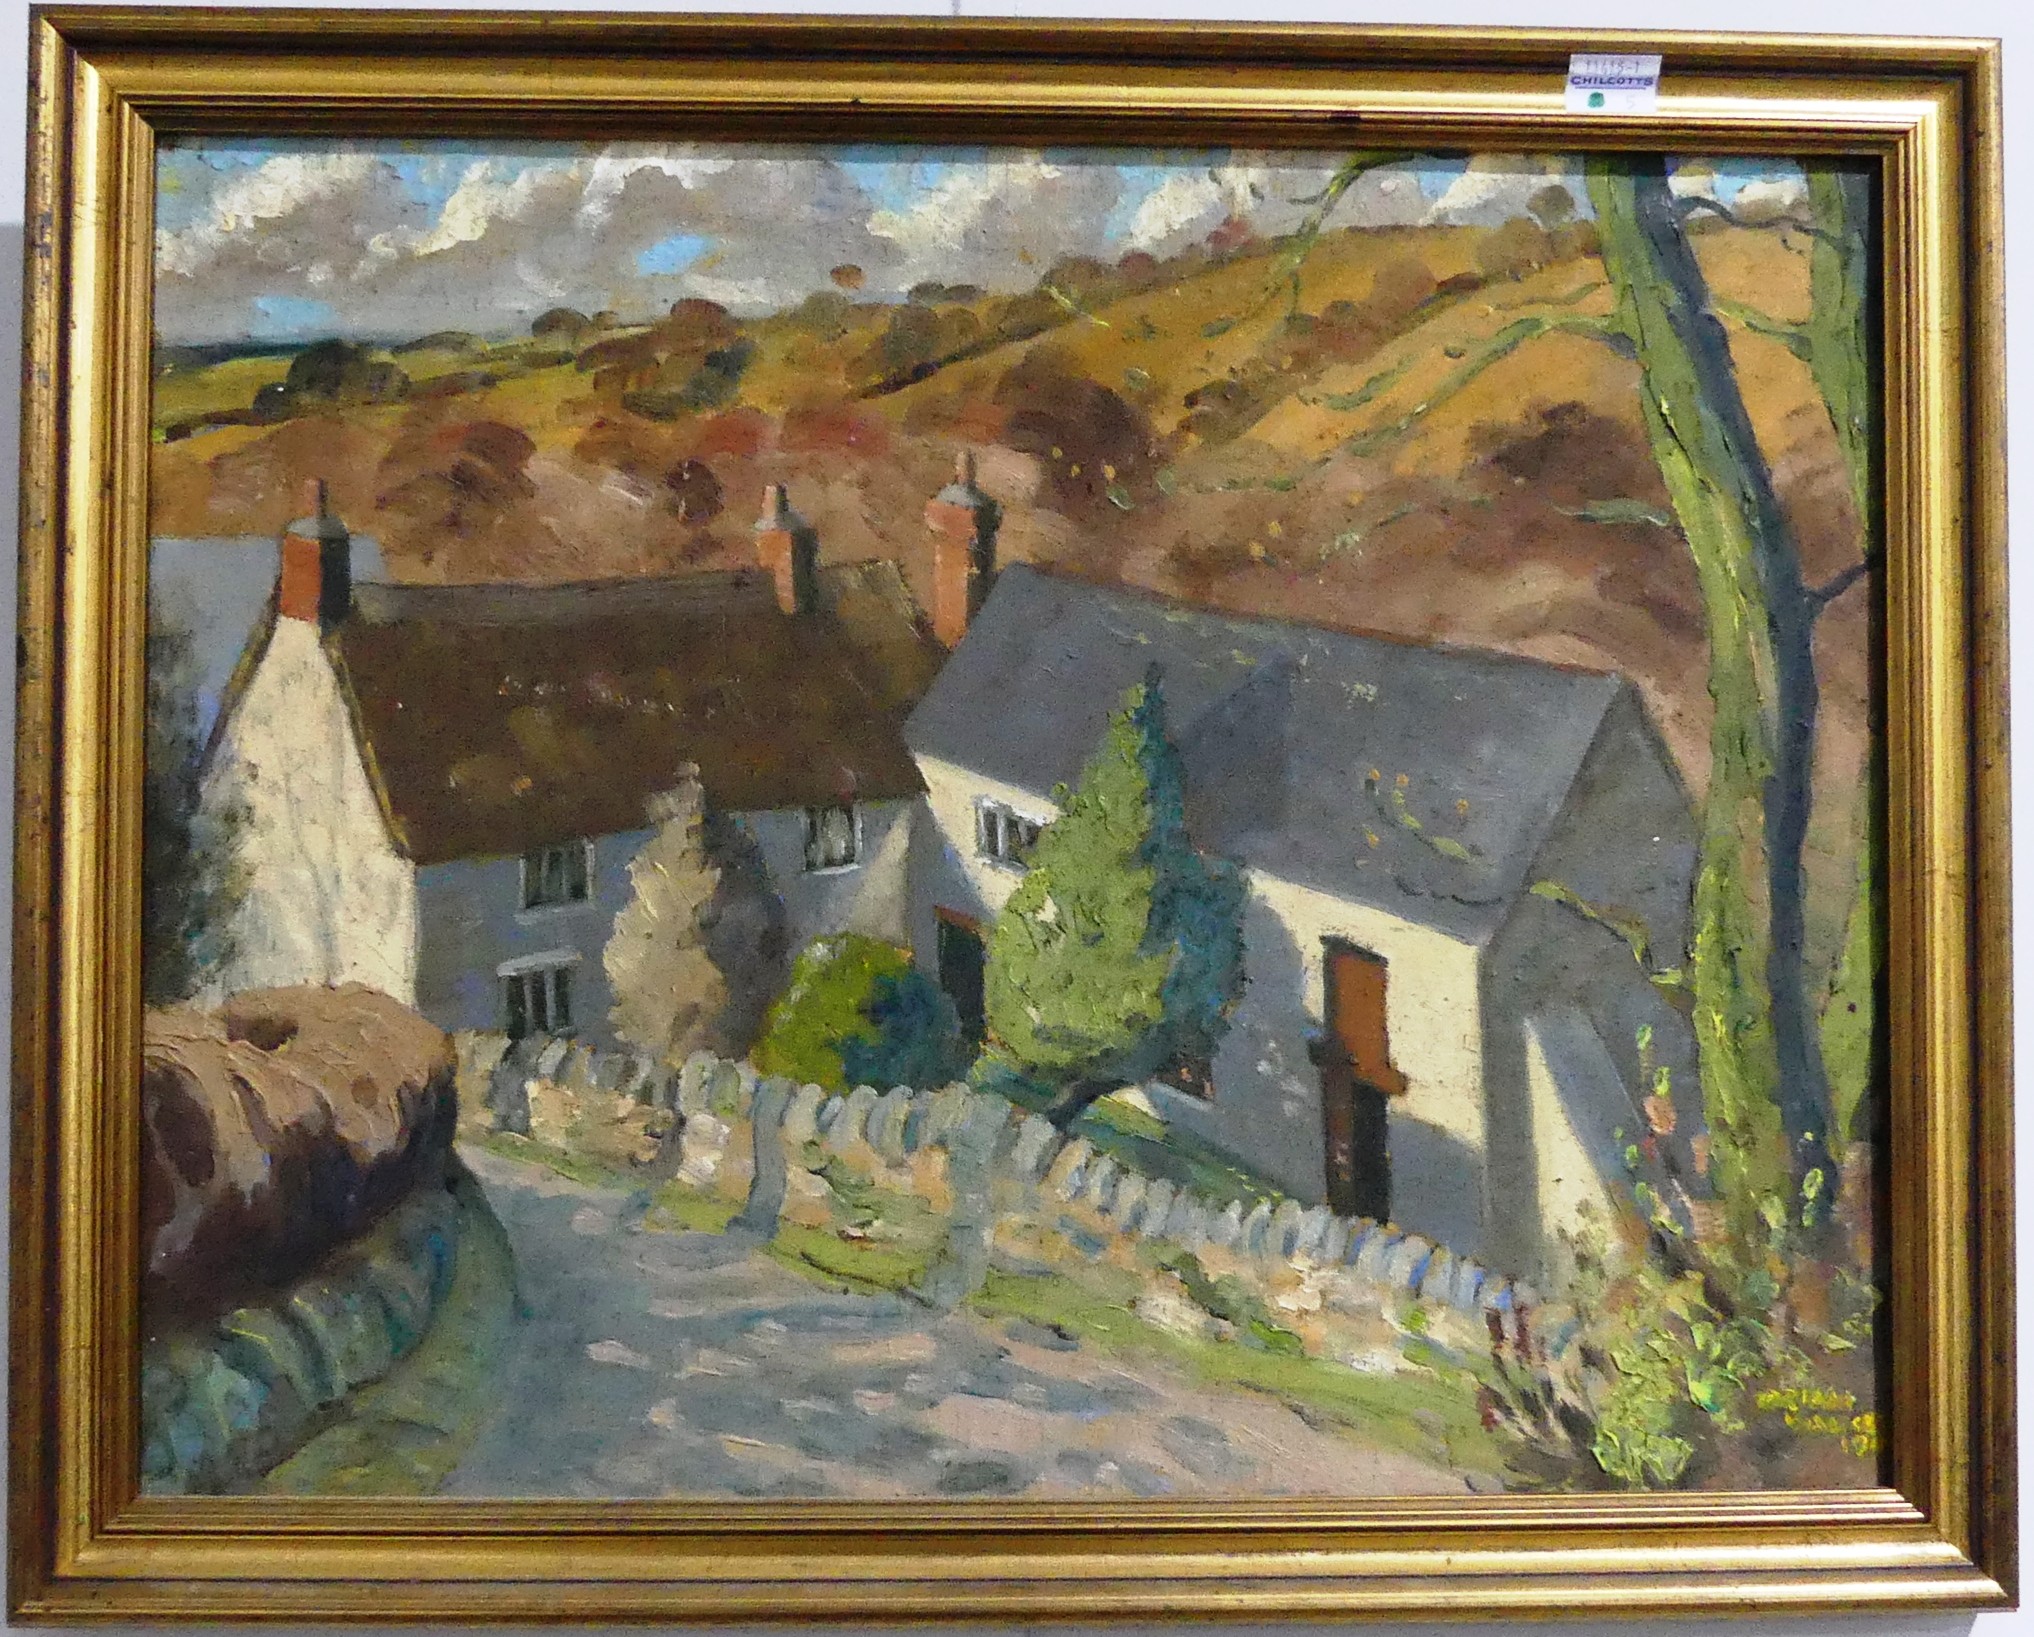 Brian Walker (British, 1926-2020), Dunkeswell, oil on board, signed, dated 1947, 35.5cm x 45.75cm,